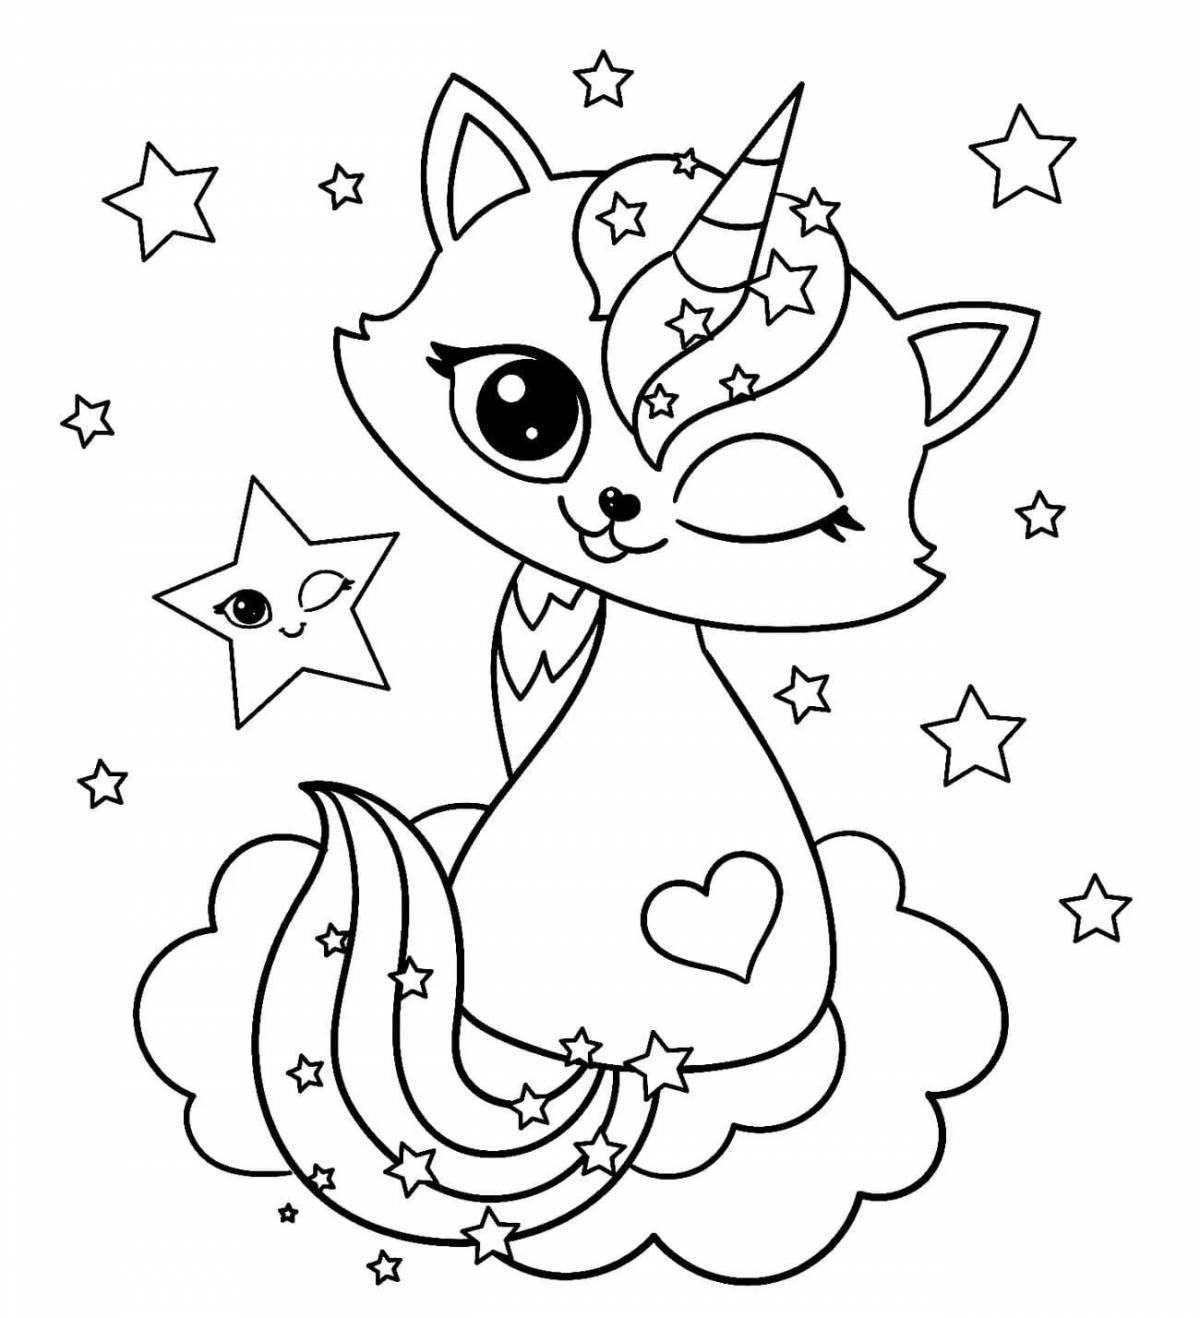 Awesome unicorn cat coloring book